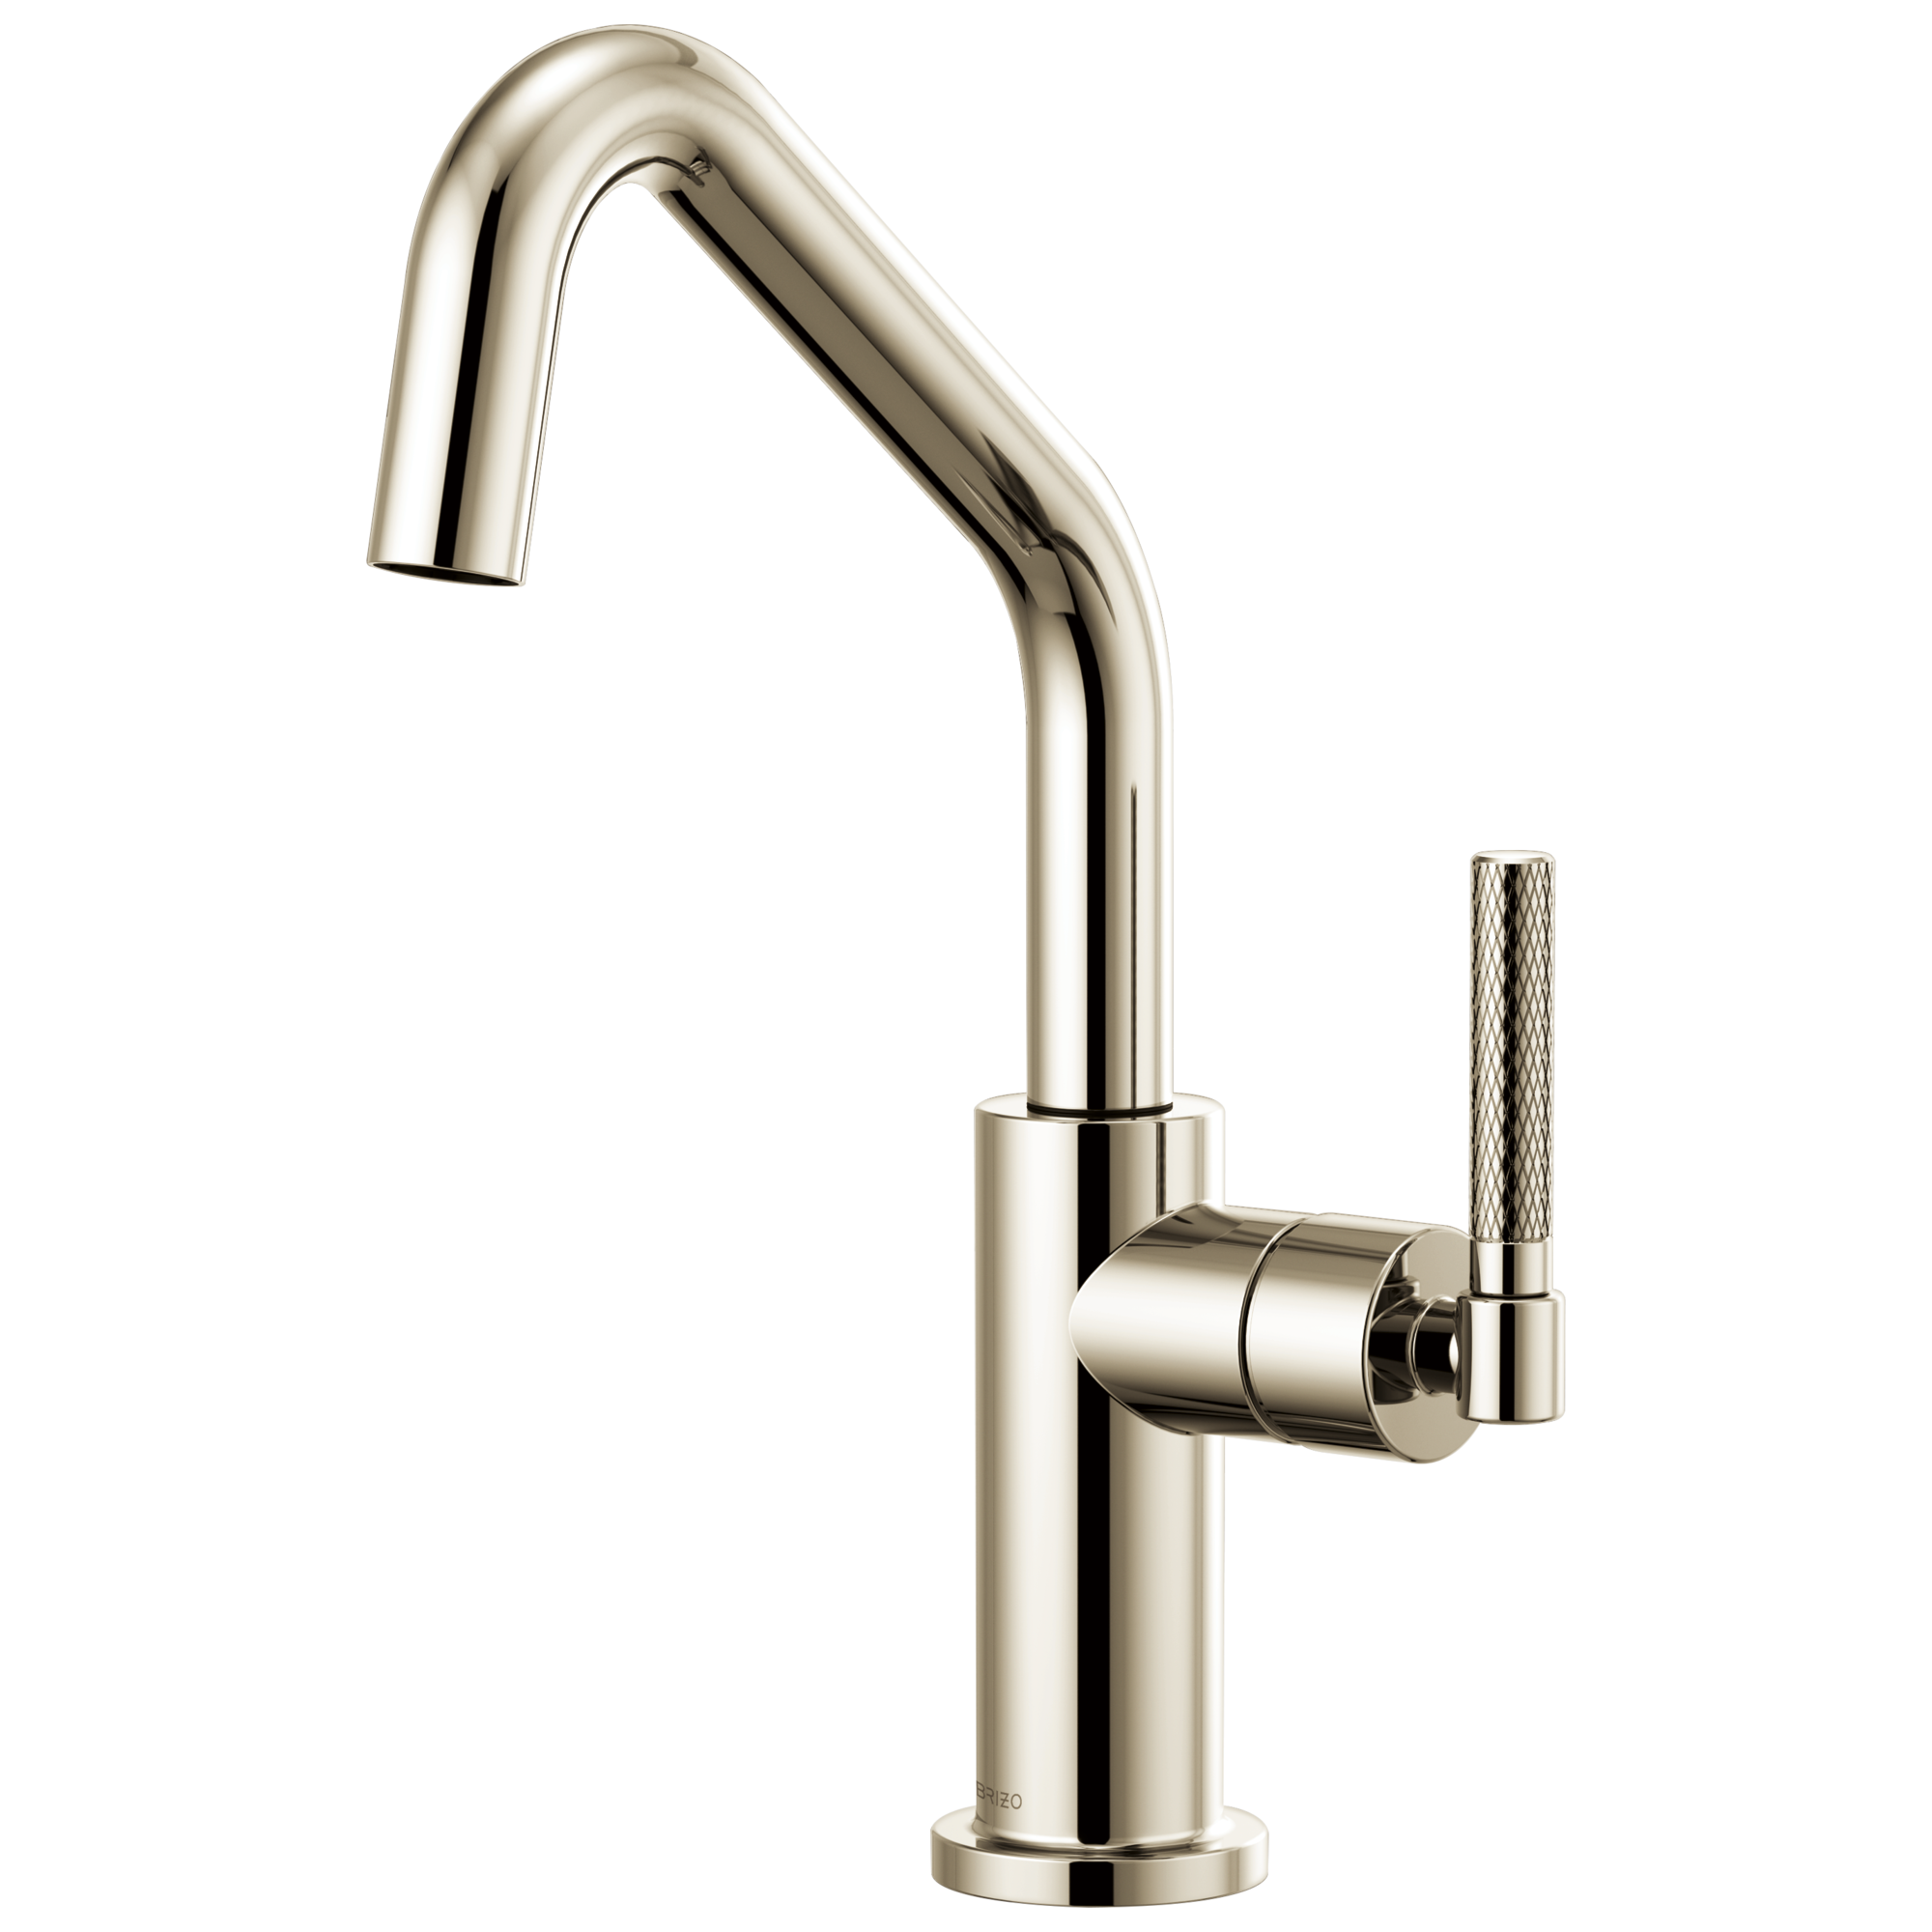 Brizo Litze Bar Faucet with Angled Spout and Knurled Handle Kit